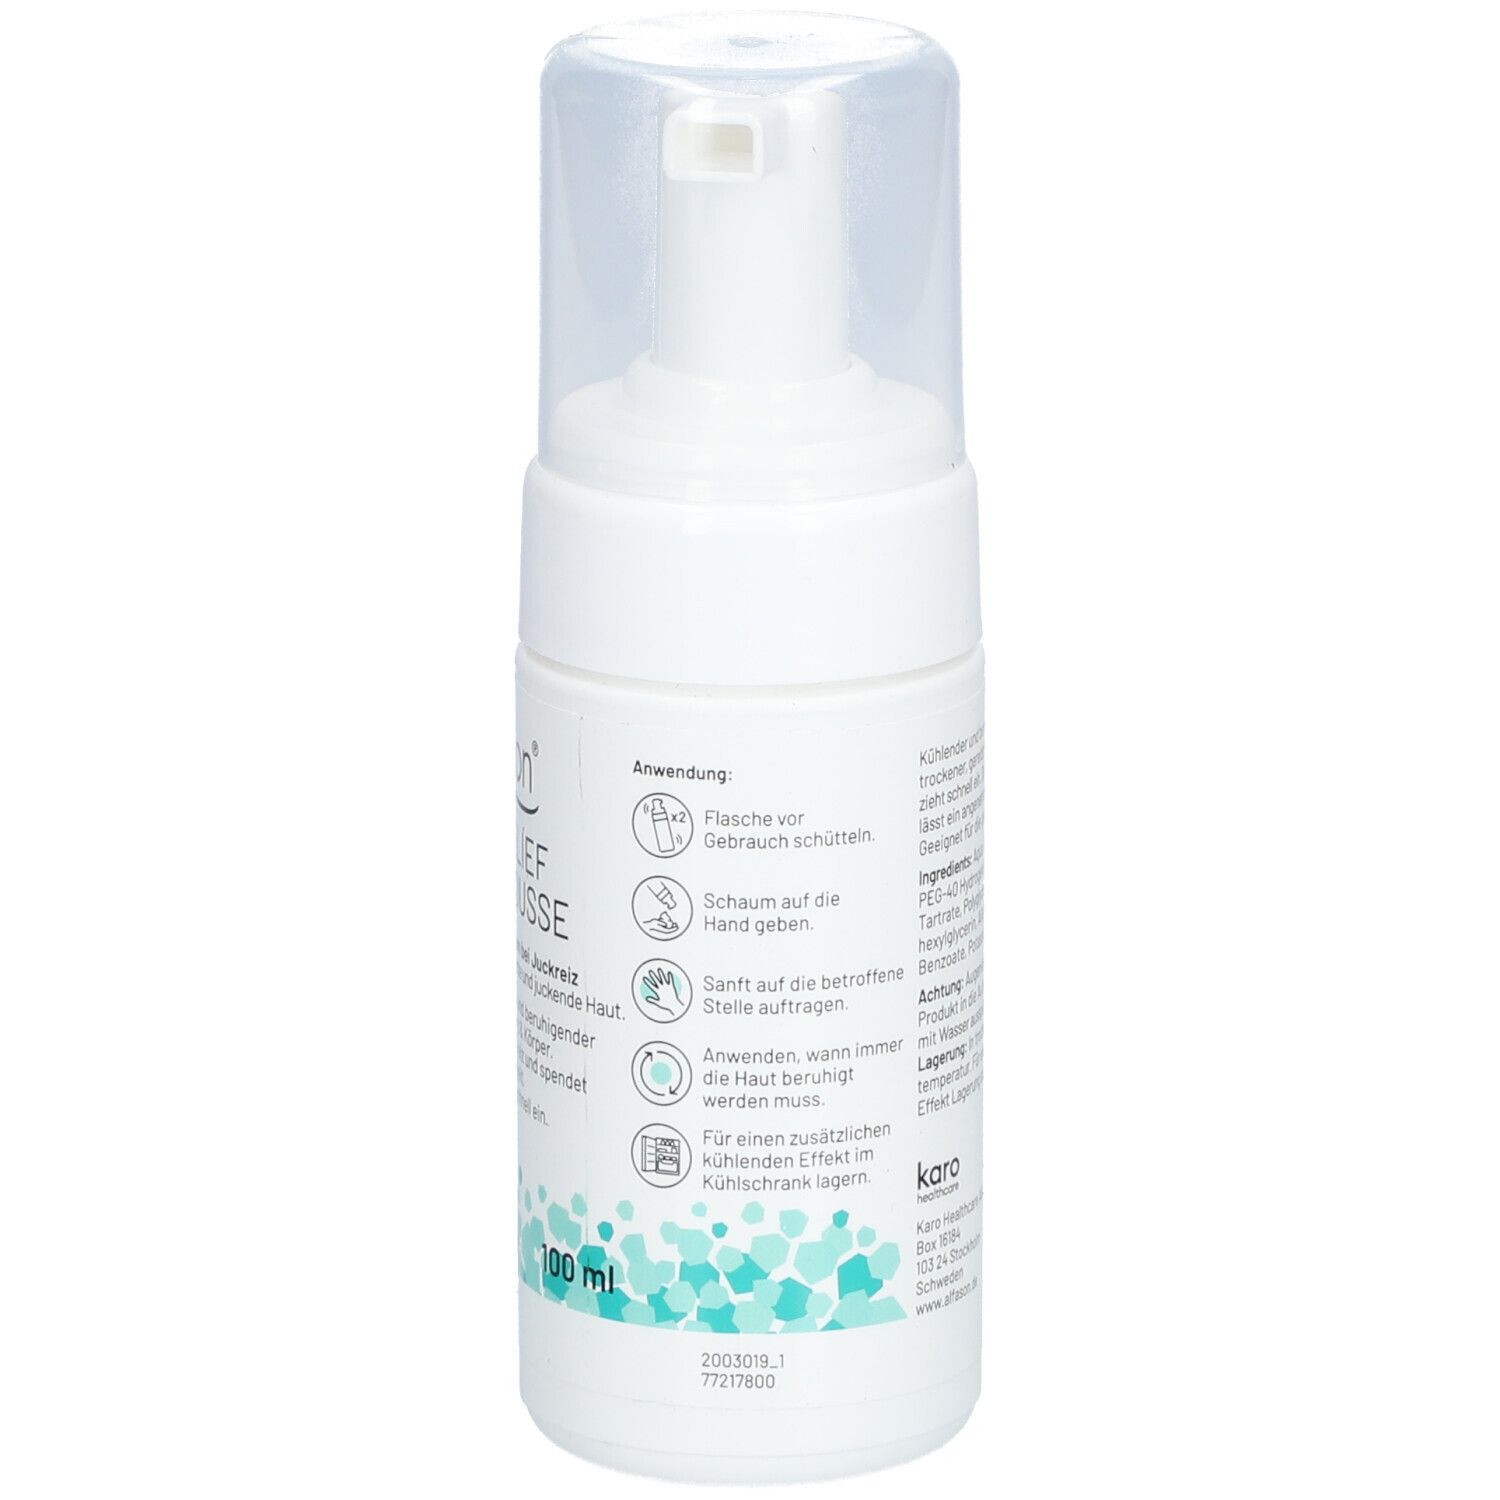 Alfason® ItchRelief Coolmousse